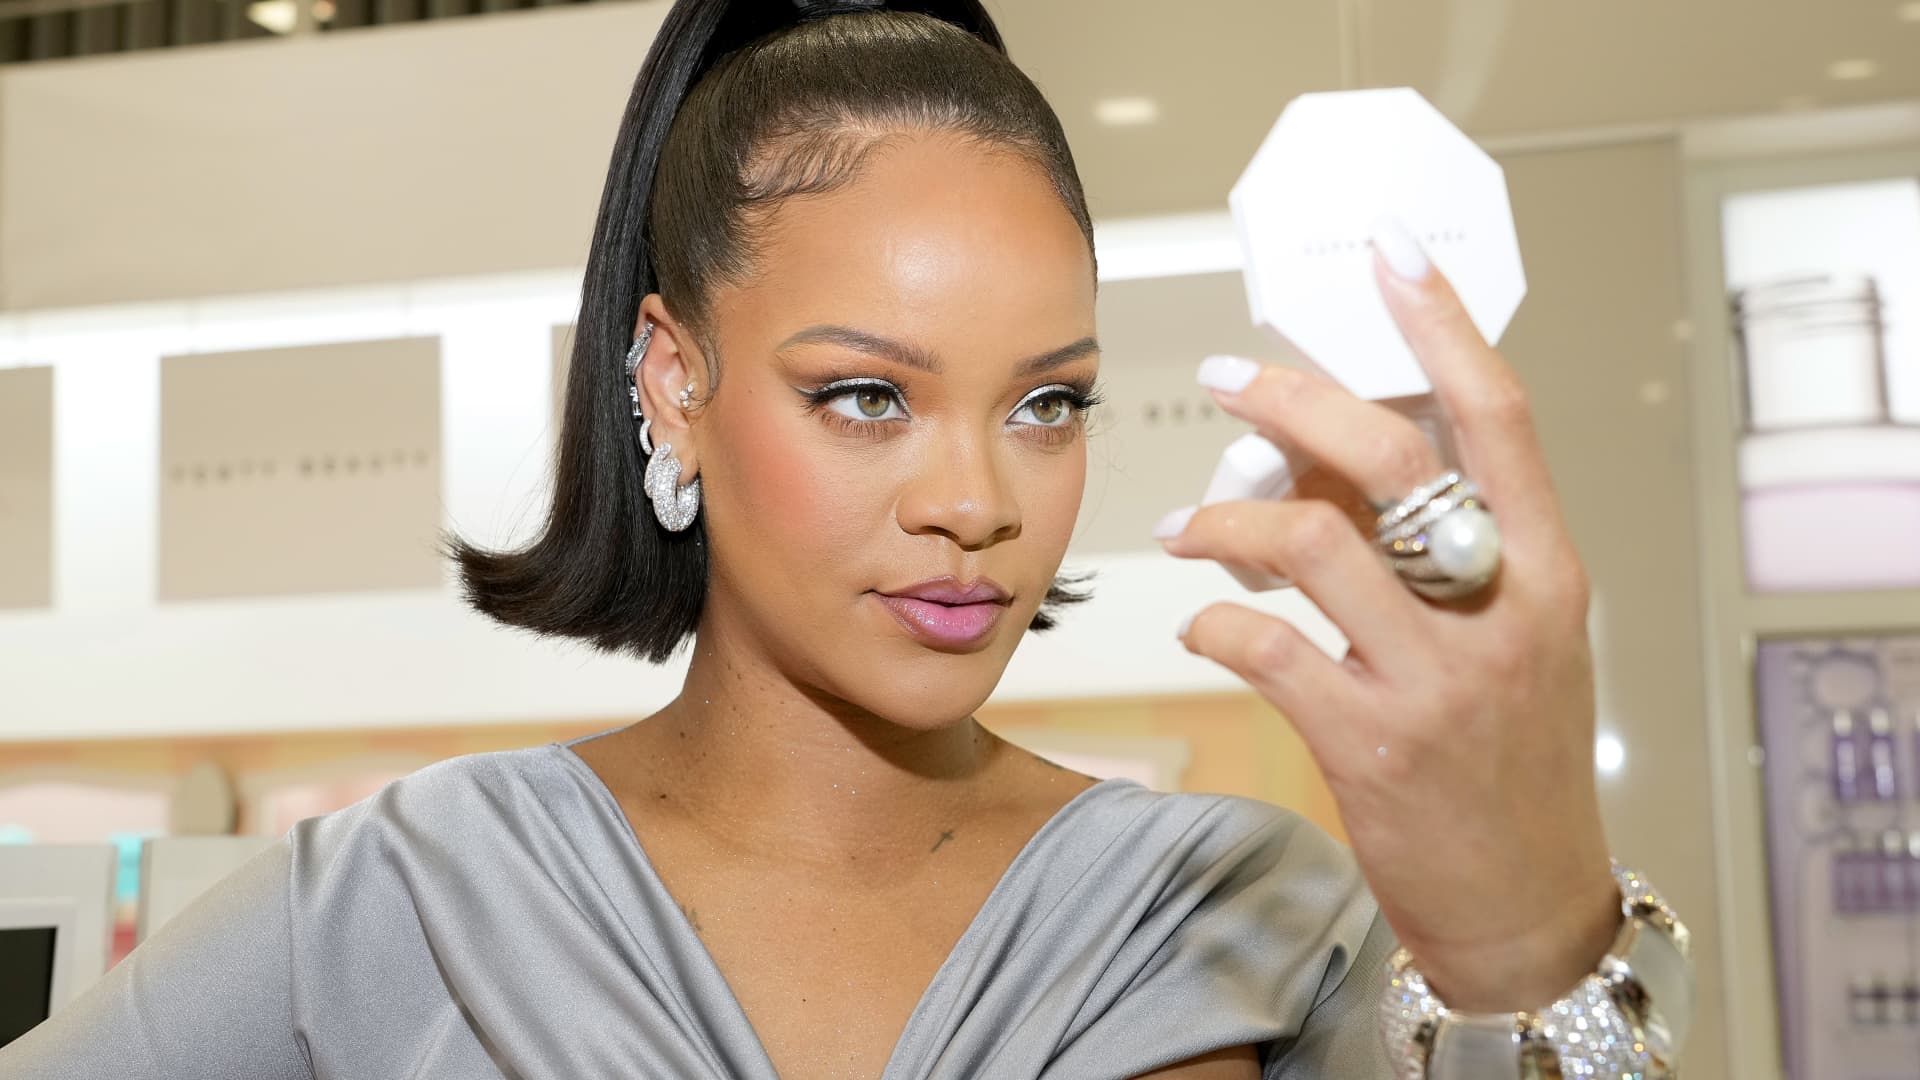 Rihanna is now America’s youngest self-made billionaire woman